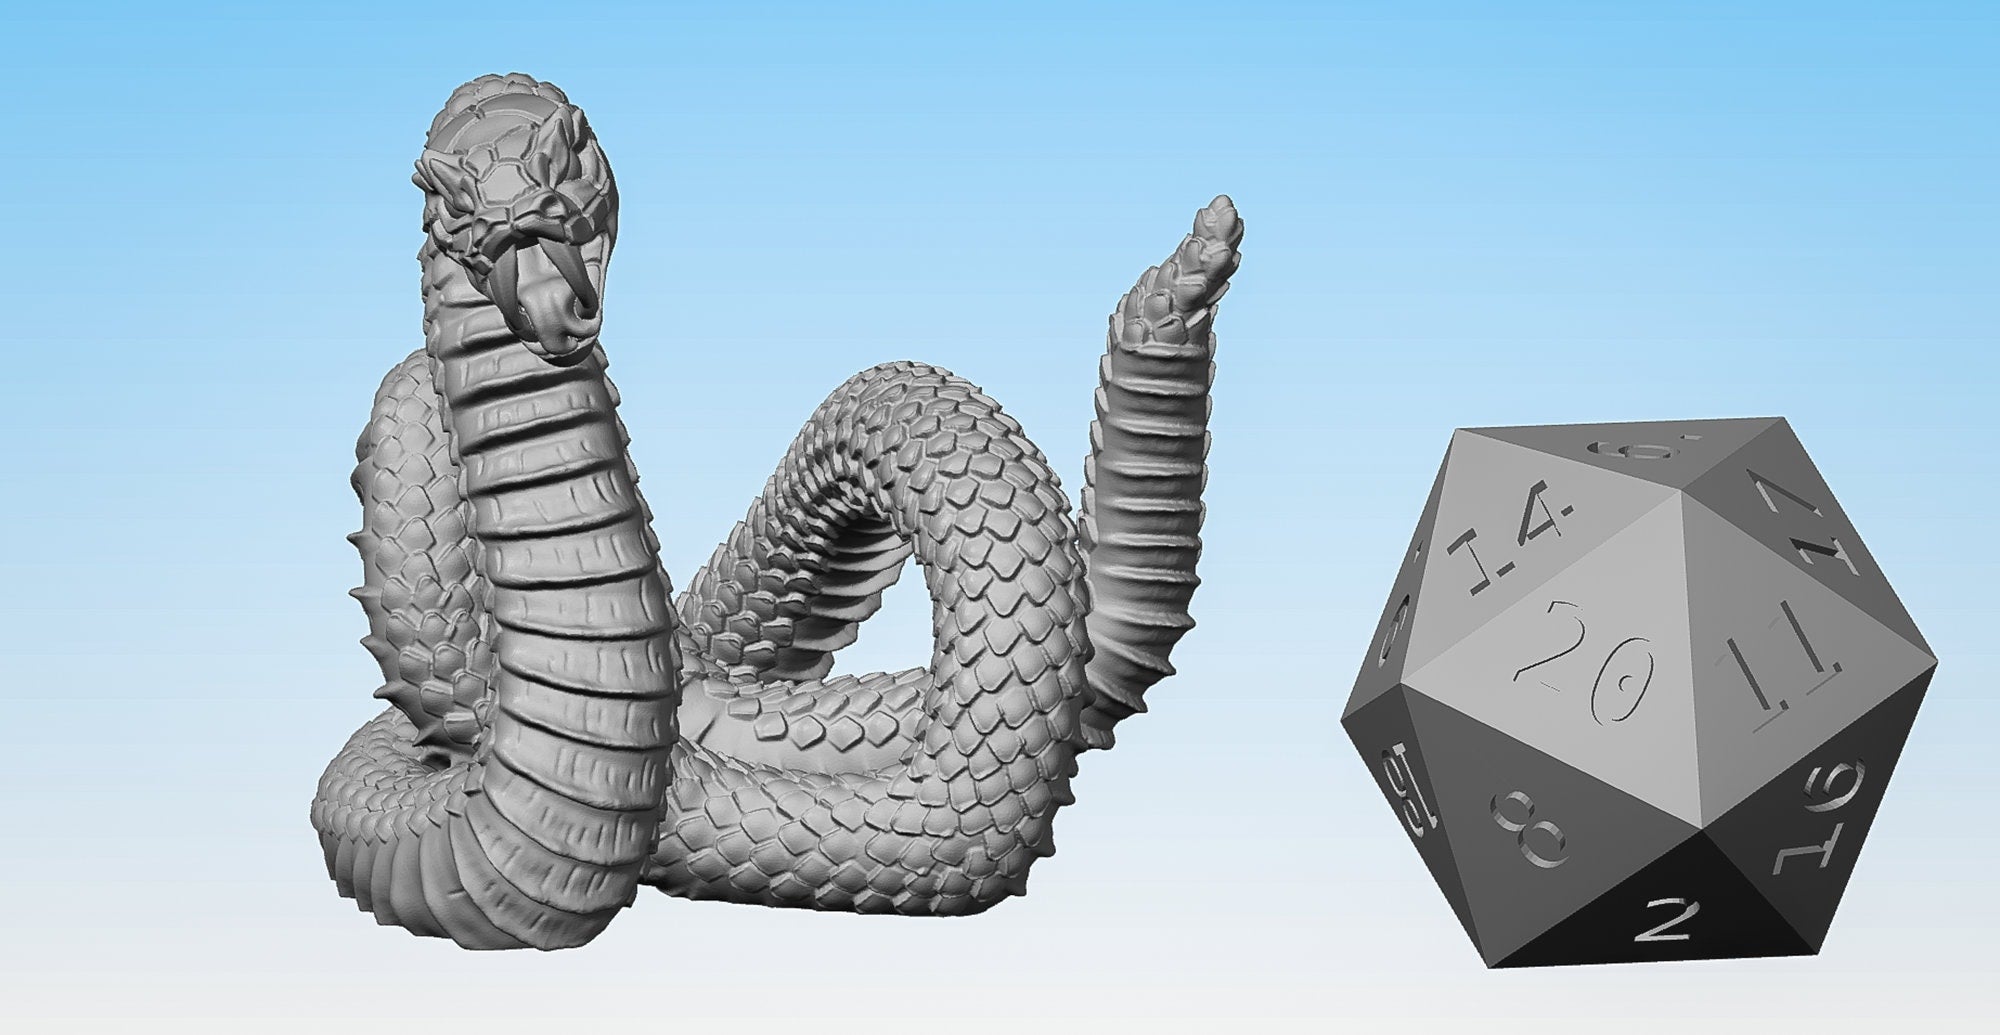 GIANT SNAKE "Viper" | 3D Print Mini | Resin-Role Playing Miniatures